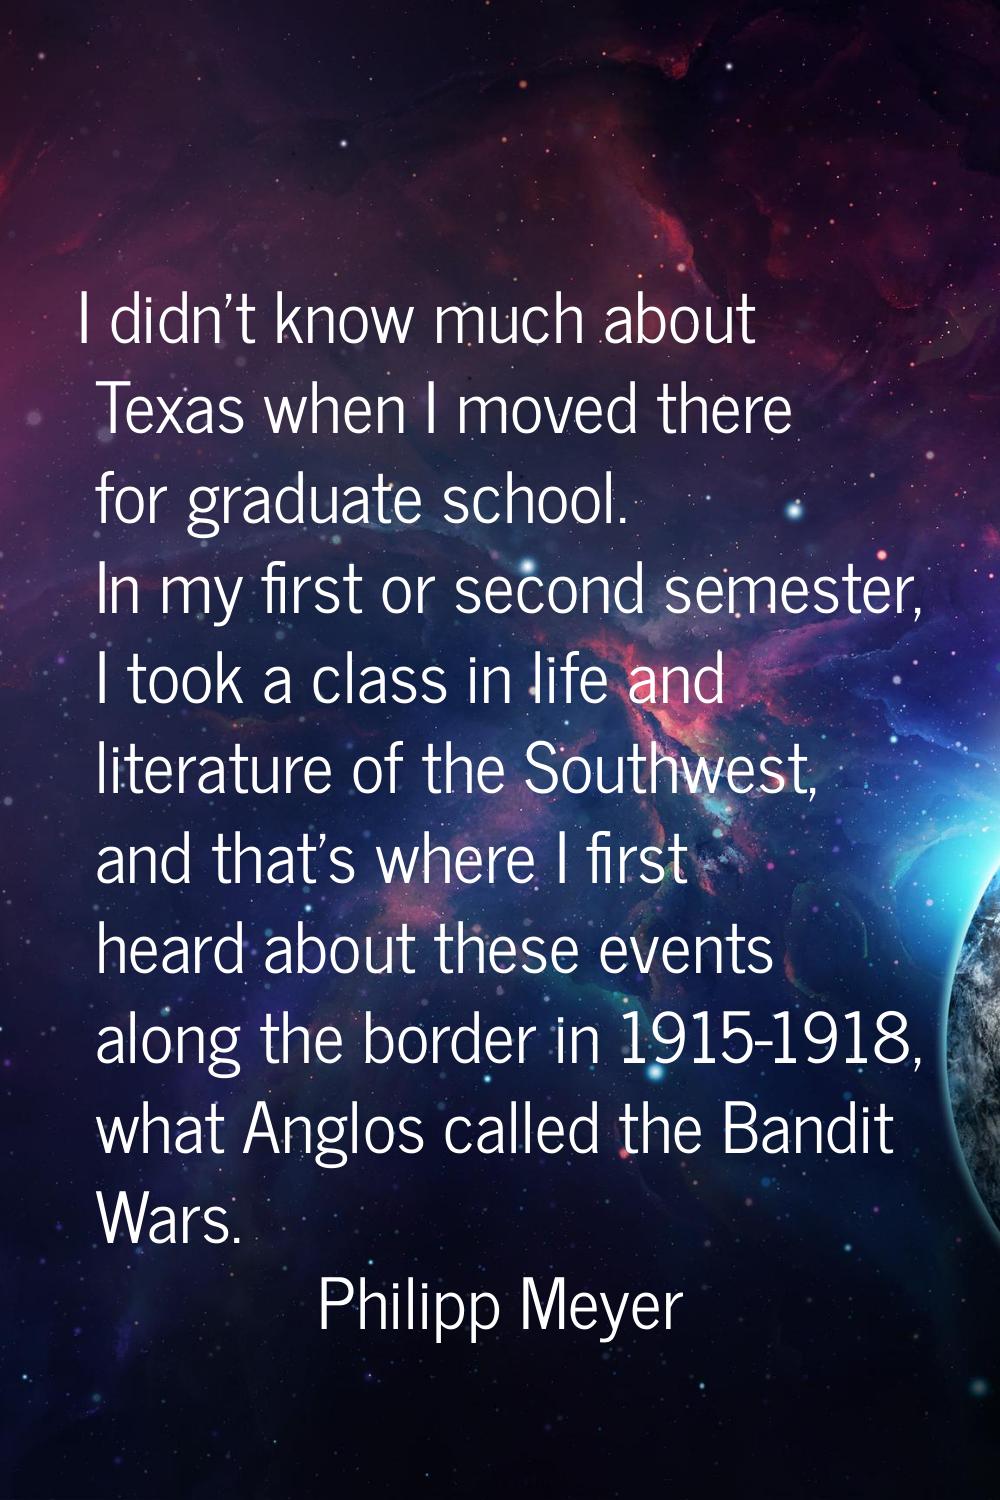 I didn't know much about Texas when I moved there for graduate school. In my first or second semest